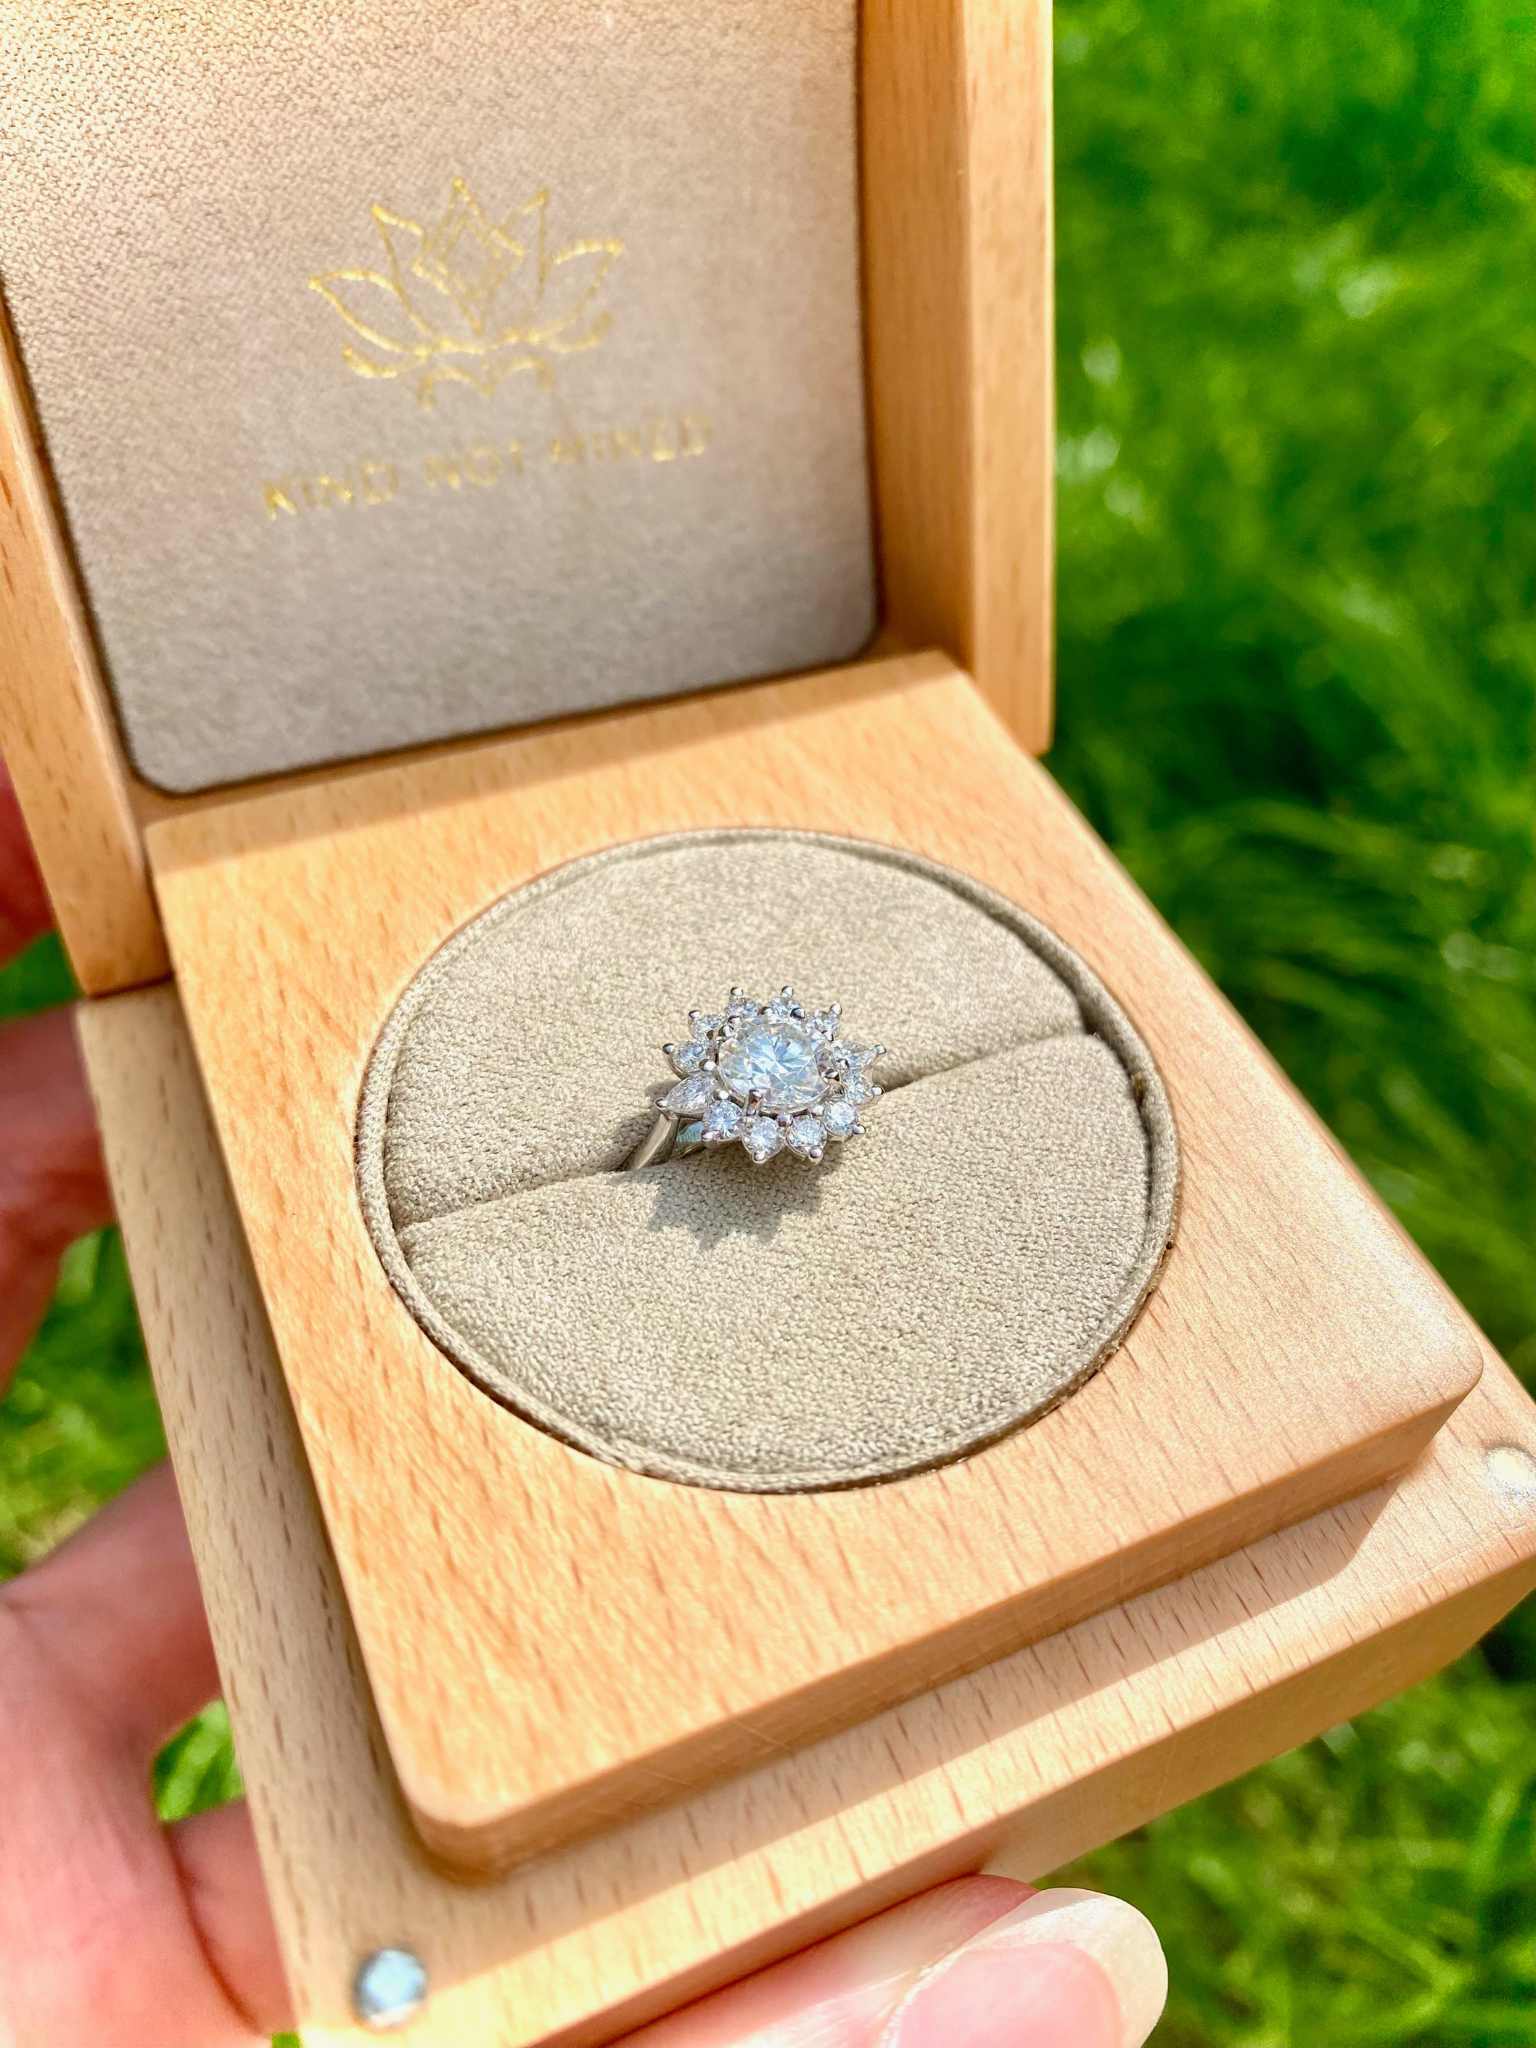 Katherine's engagement ring in its Ethica Diamonds box